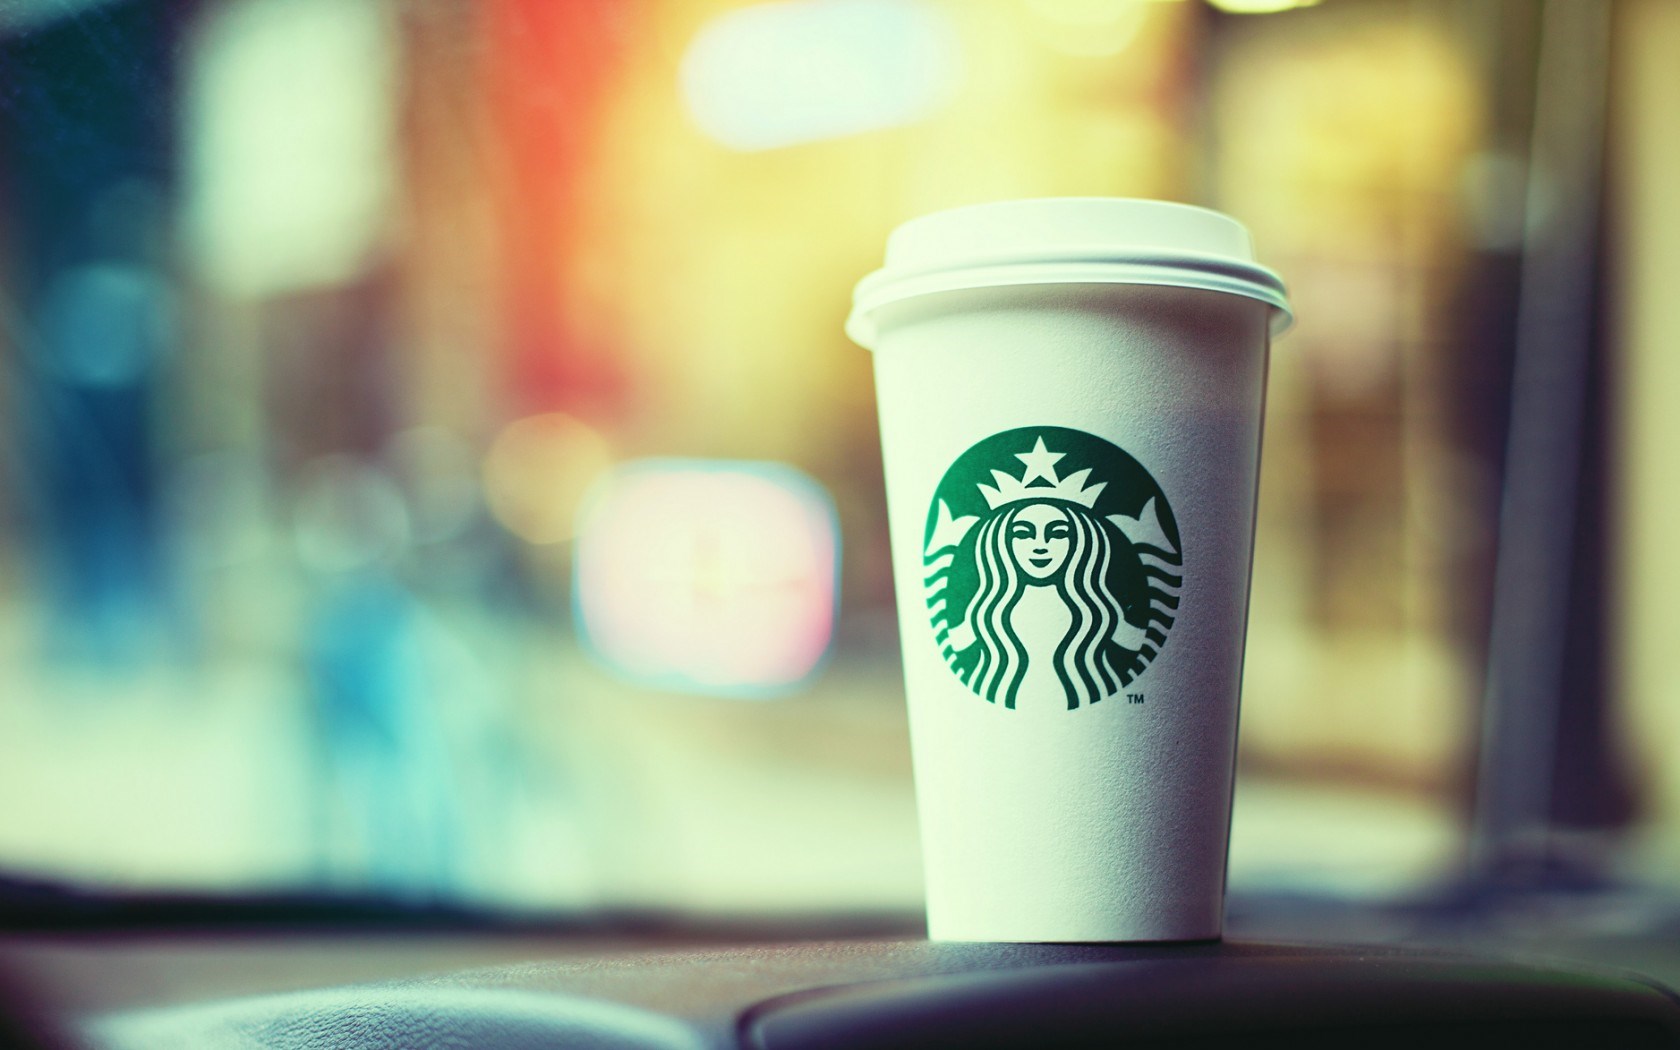 Wallpapers Hd Starbucks Cup | High Definitions Wallpapers